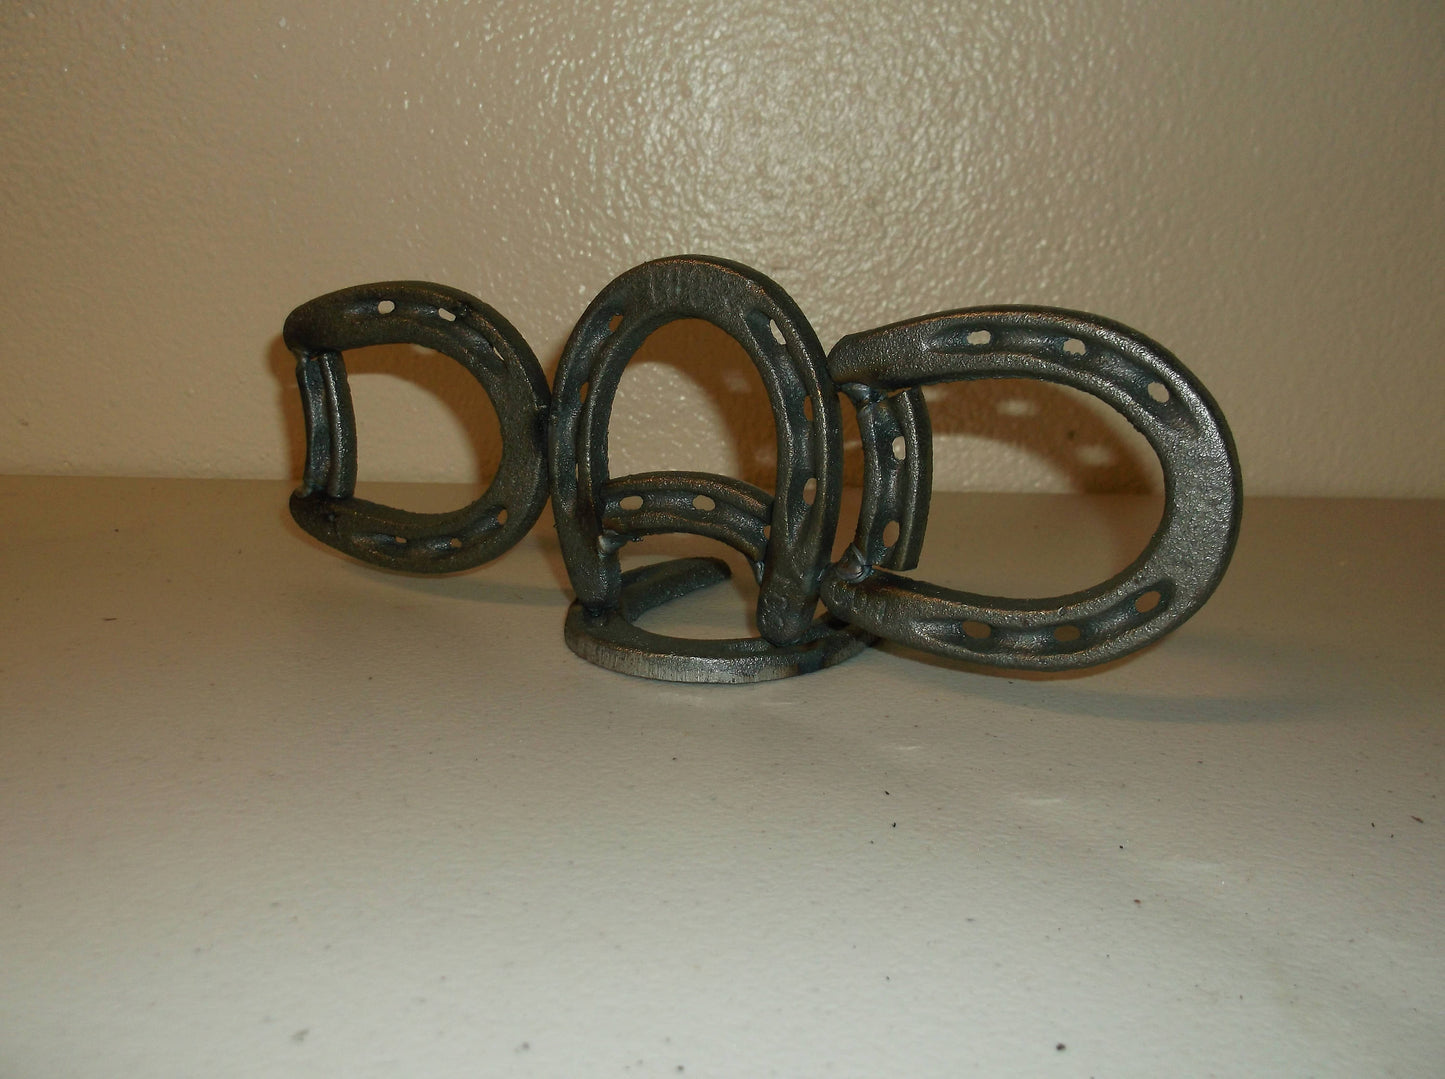 Horseshoe Present for Dad, Fathers Day Welded Metal Art